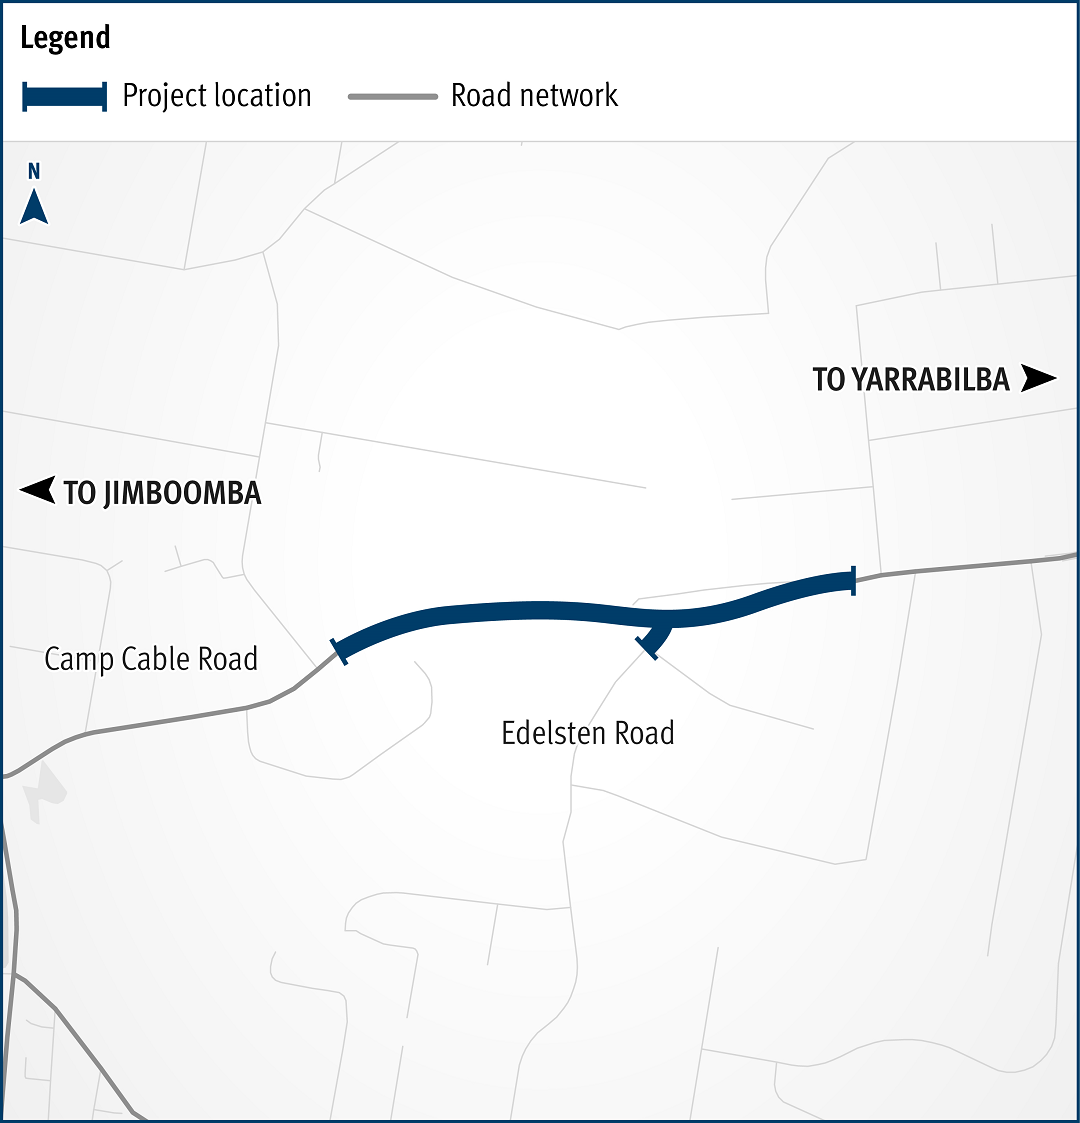 Map of Camp Cable Road and Edelsten Road improvements. Jimboomba